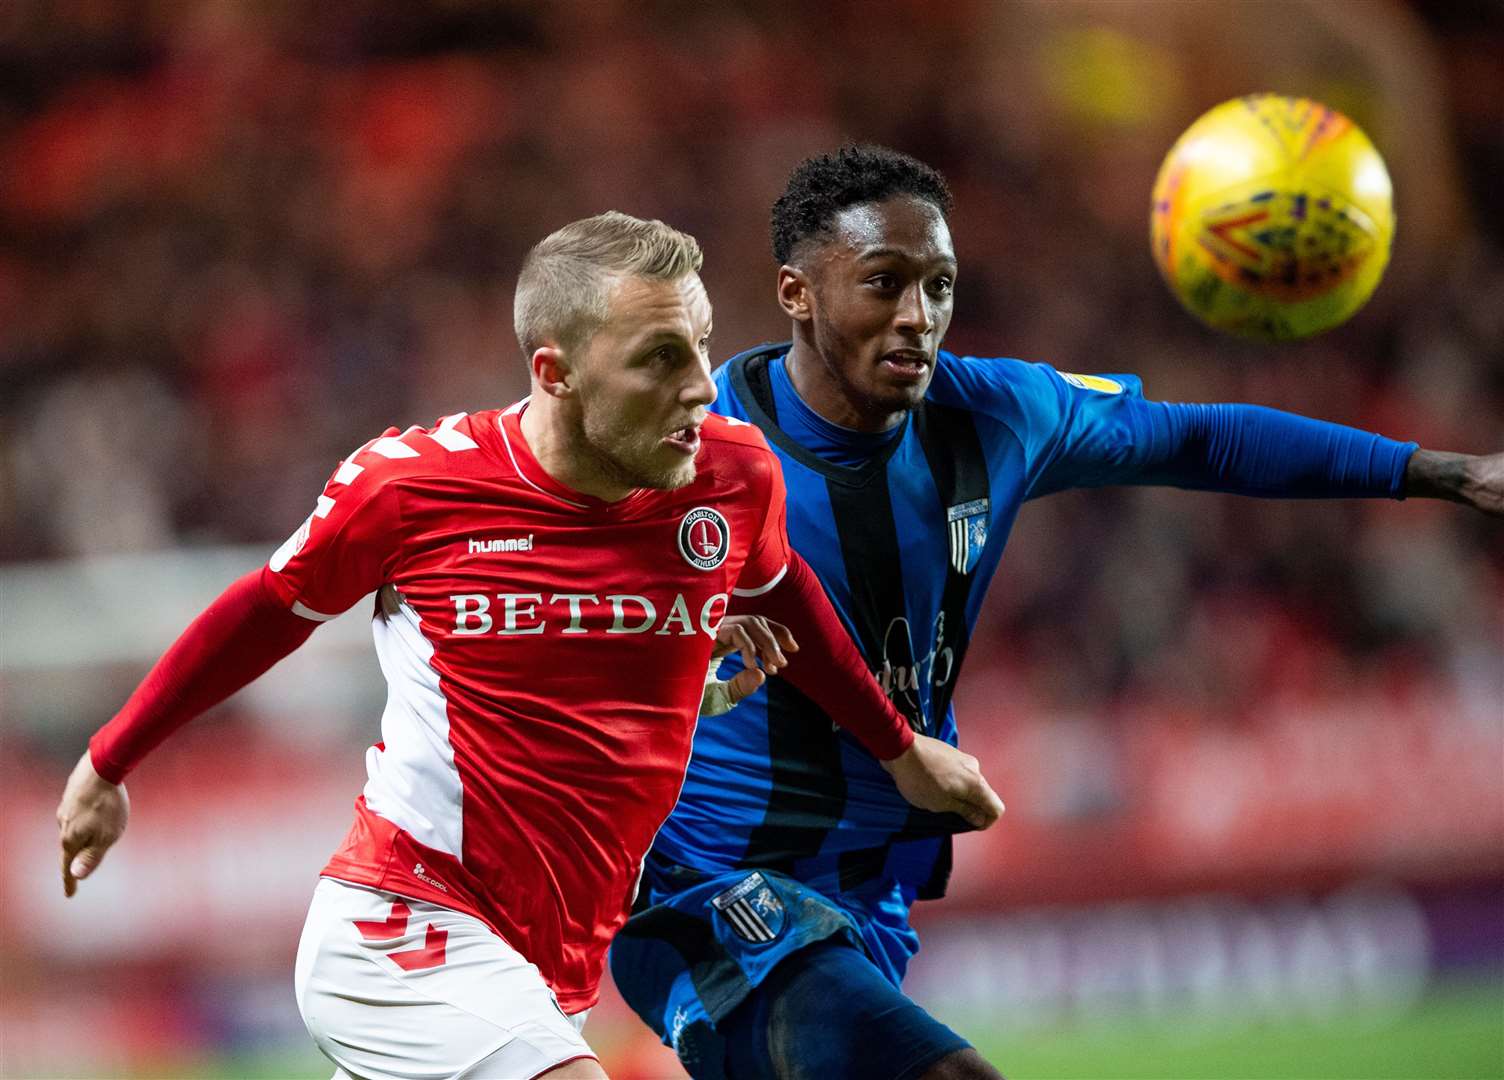 Former Charlton player Chris Soll joined the Fleet on a short-term deal in mid-December